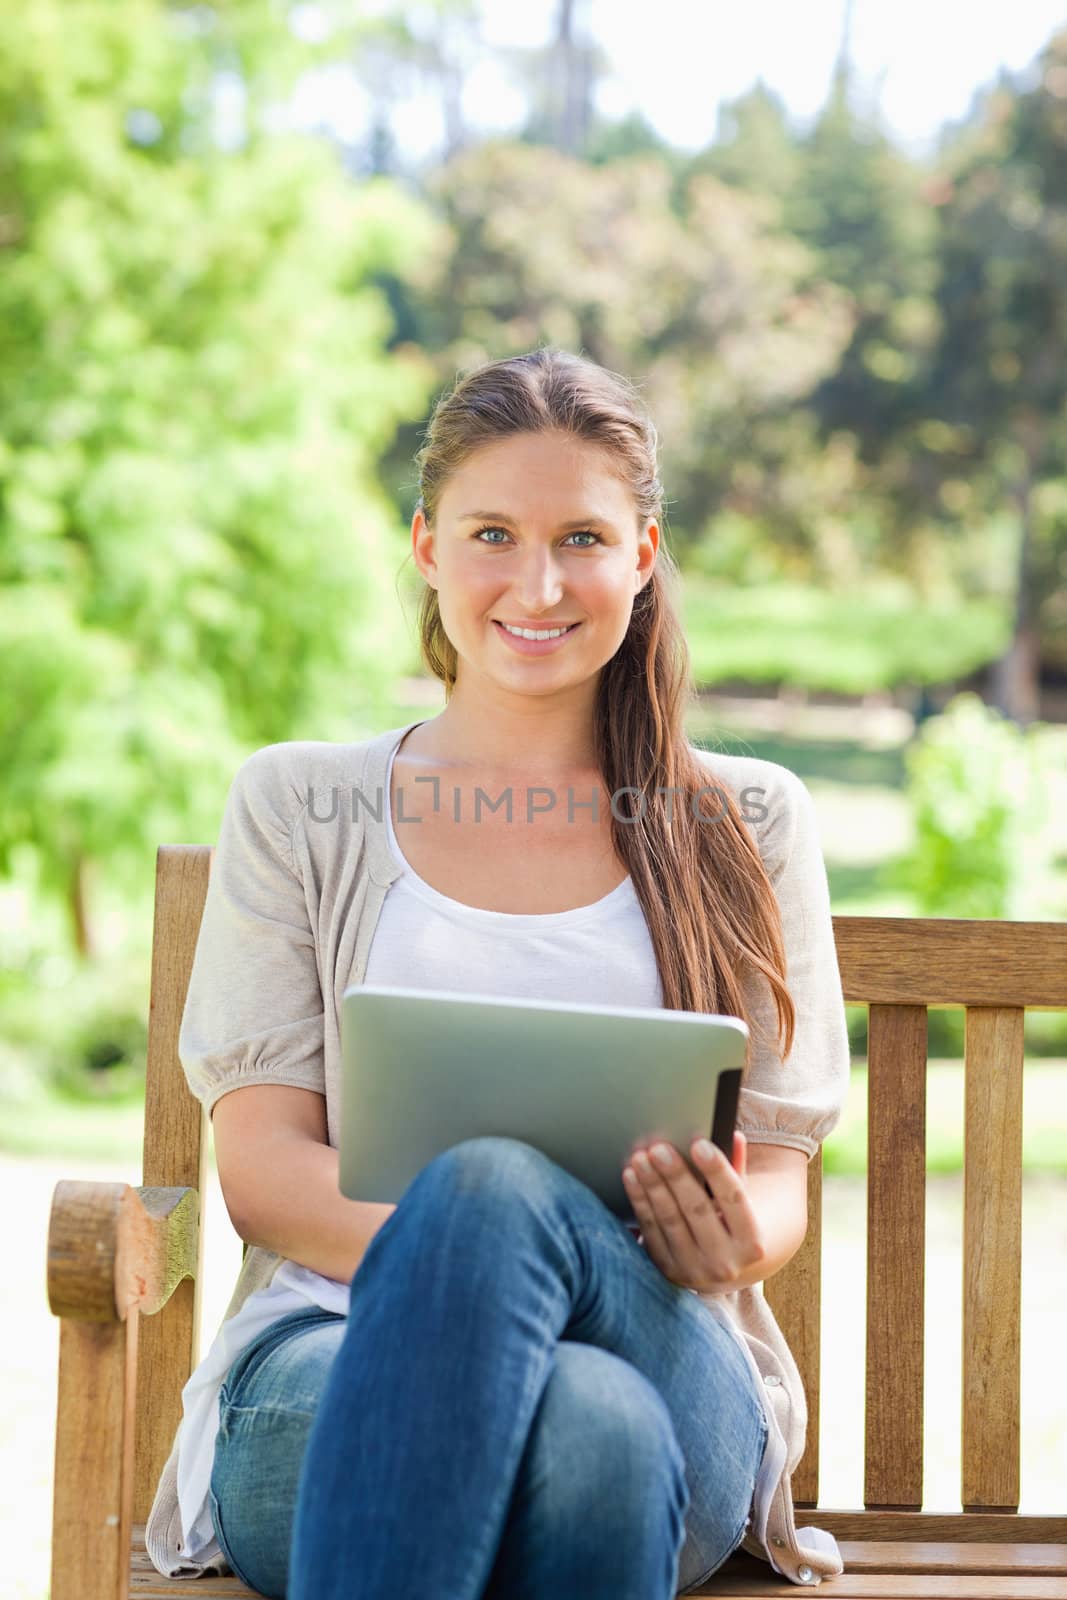 Smiling young woman on a park bench with a tablet computer